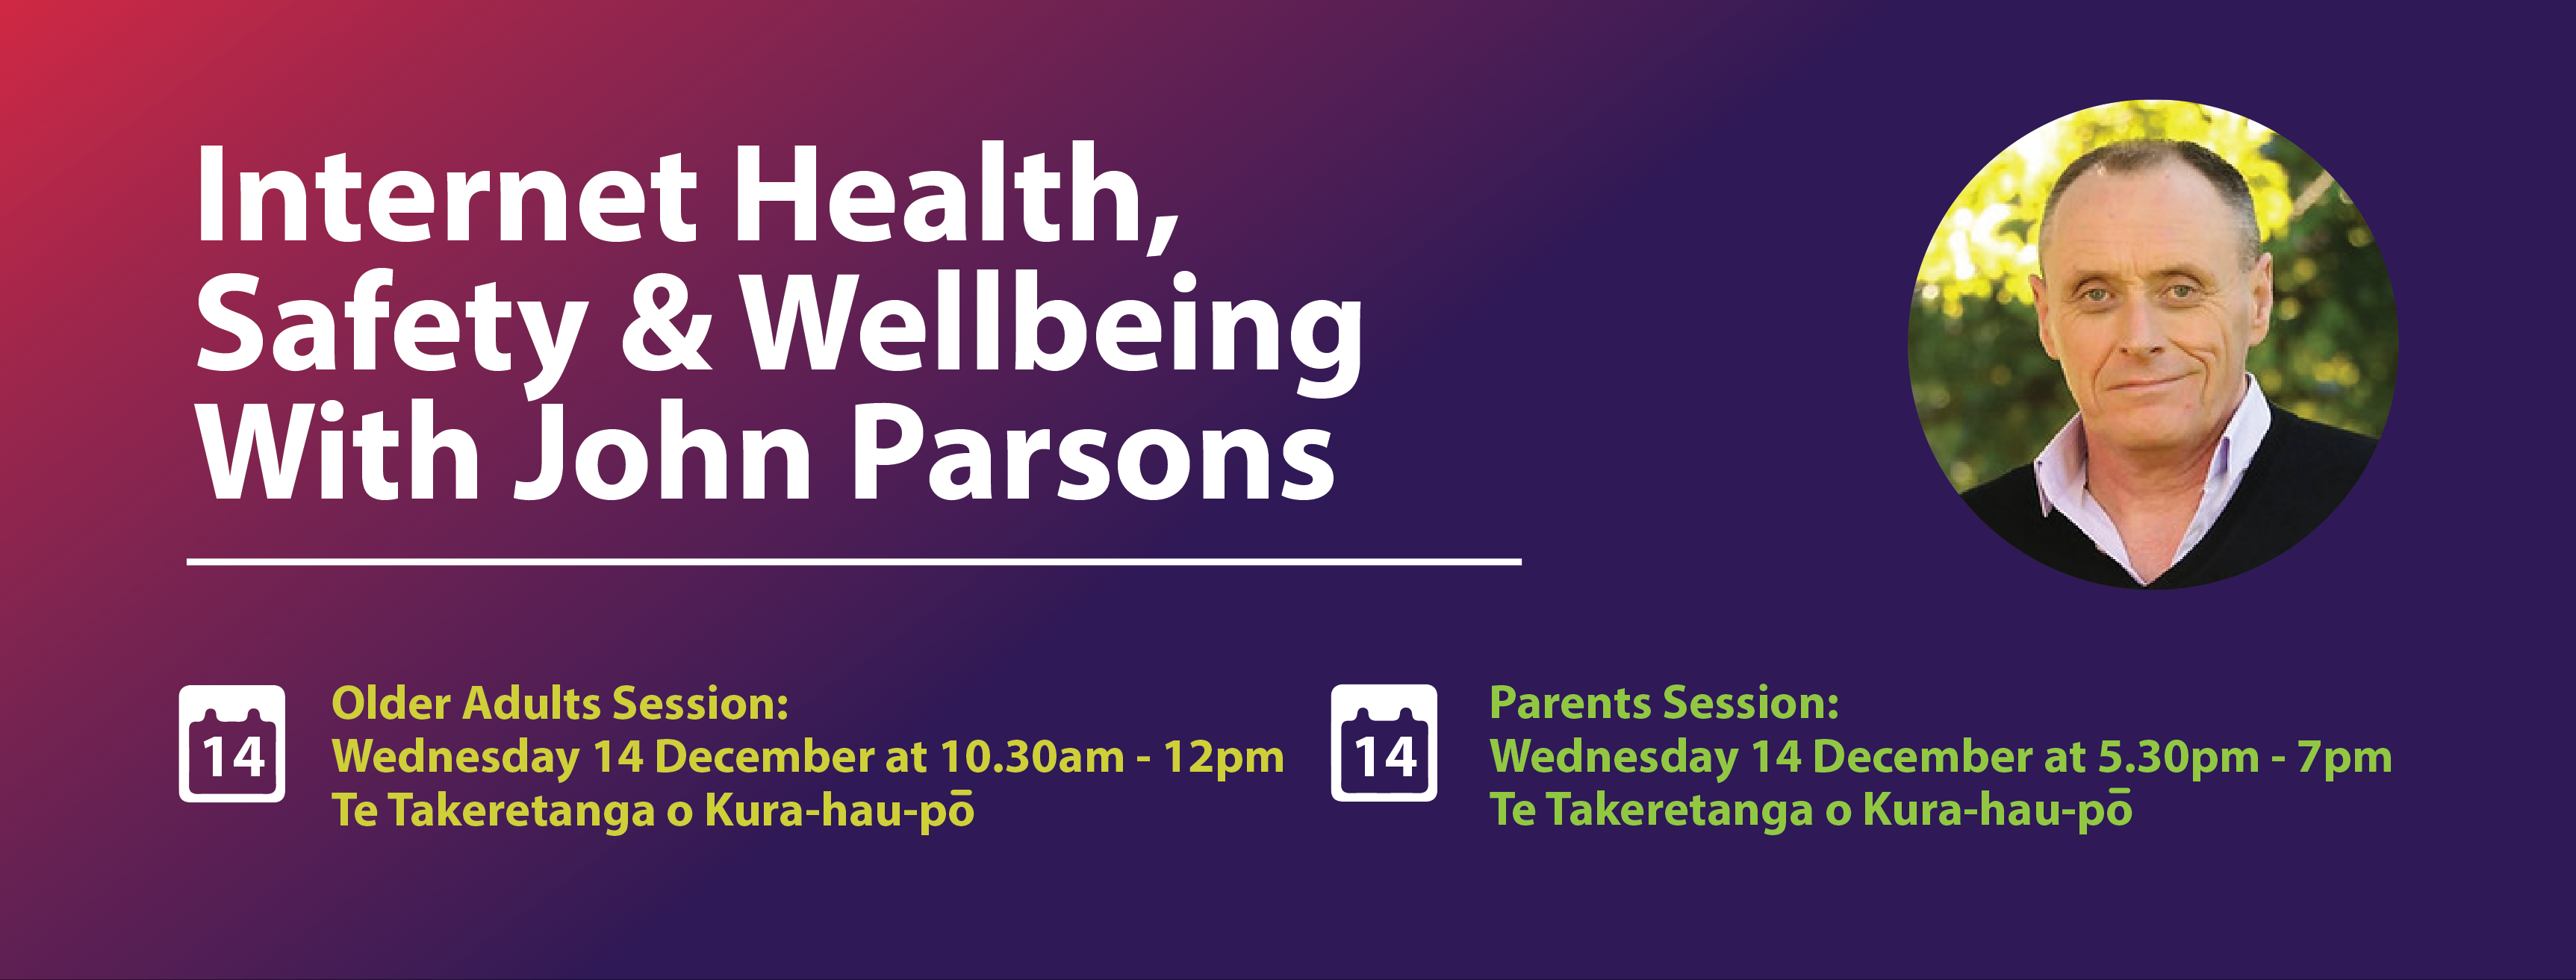 Internet Health, Safety and wellbeing with John Parsons.